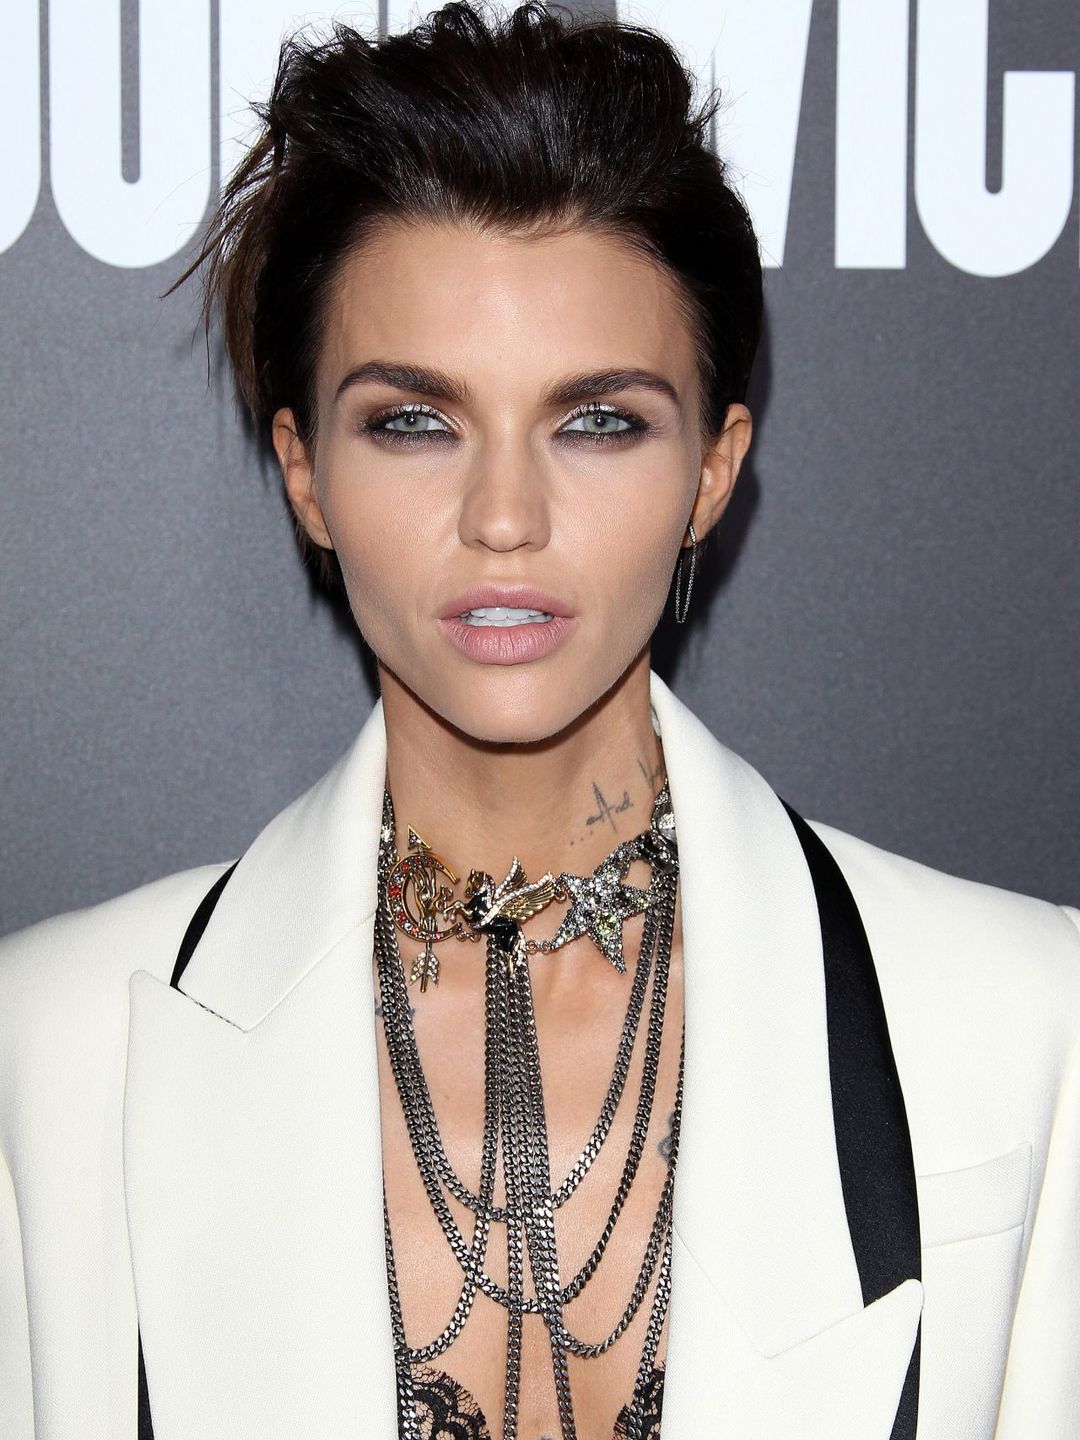 Ruby Rose story of success